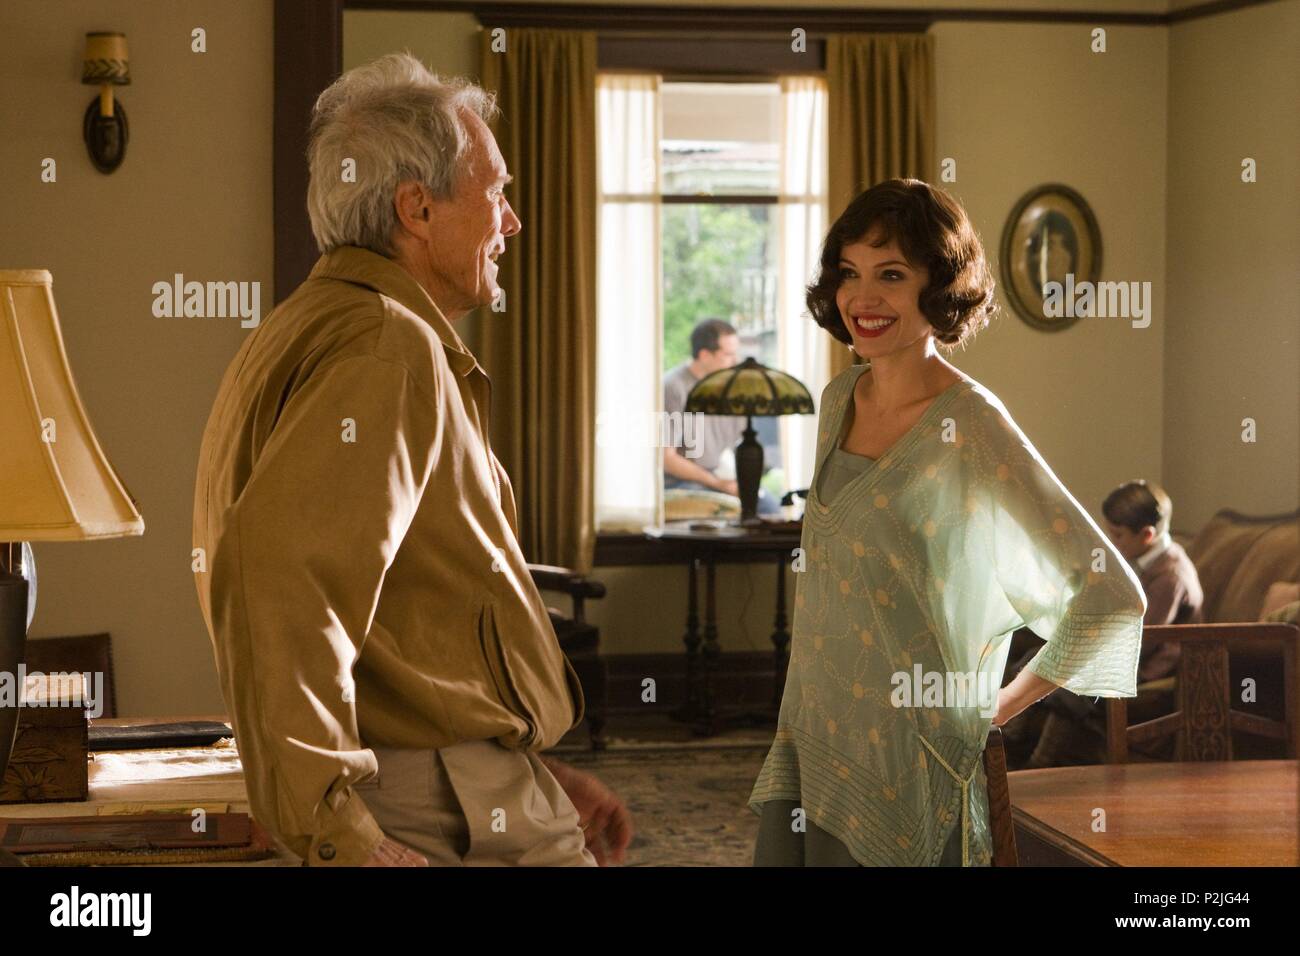 Changeling Film Stock Photos & Changeling Film Stock Images - Alamy